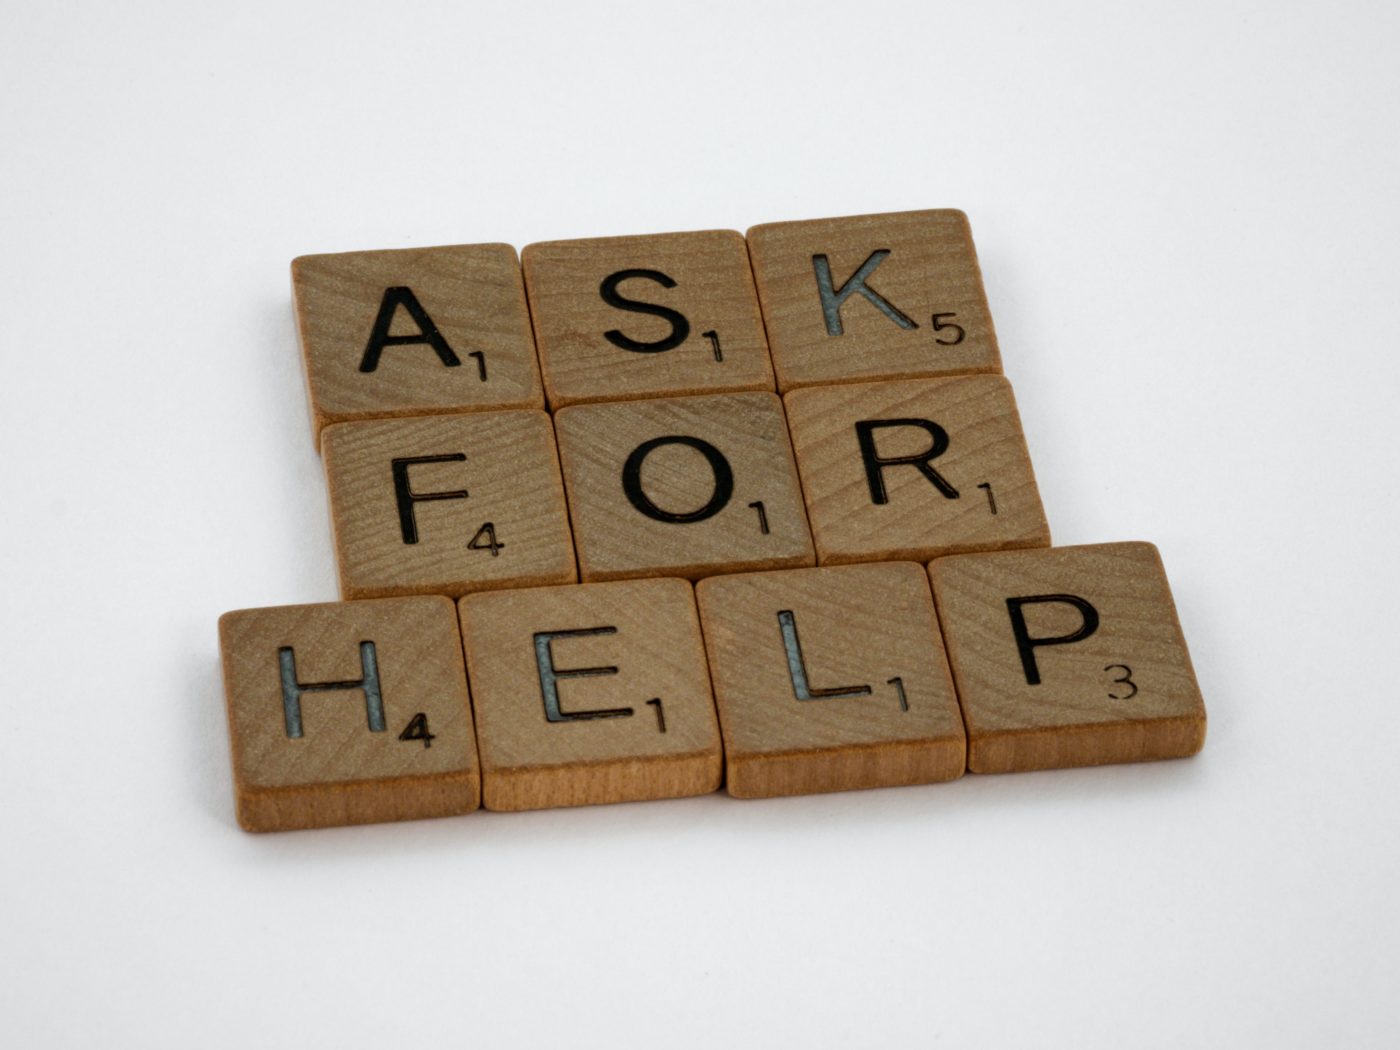 Ask for Help spelled out in blocks